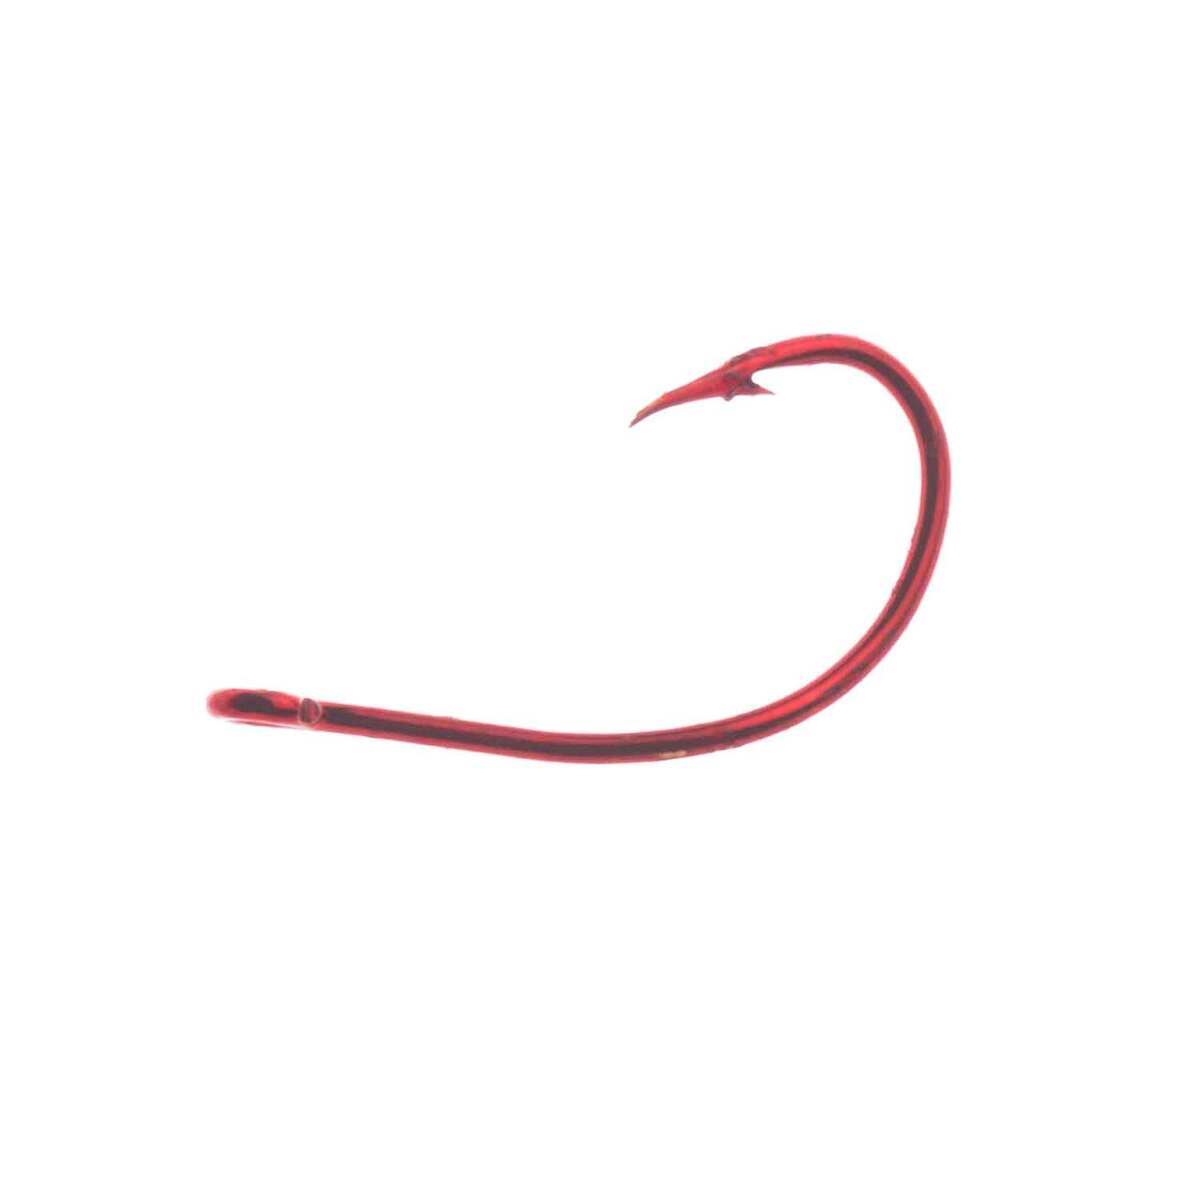 Eagle Claw Wide Gap Bait Hook, Size 6, Red